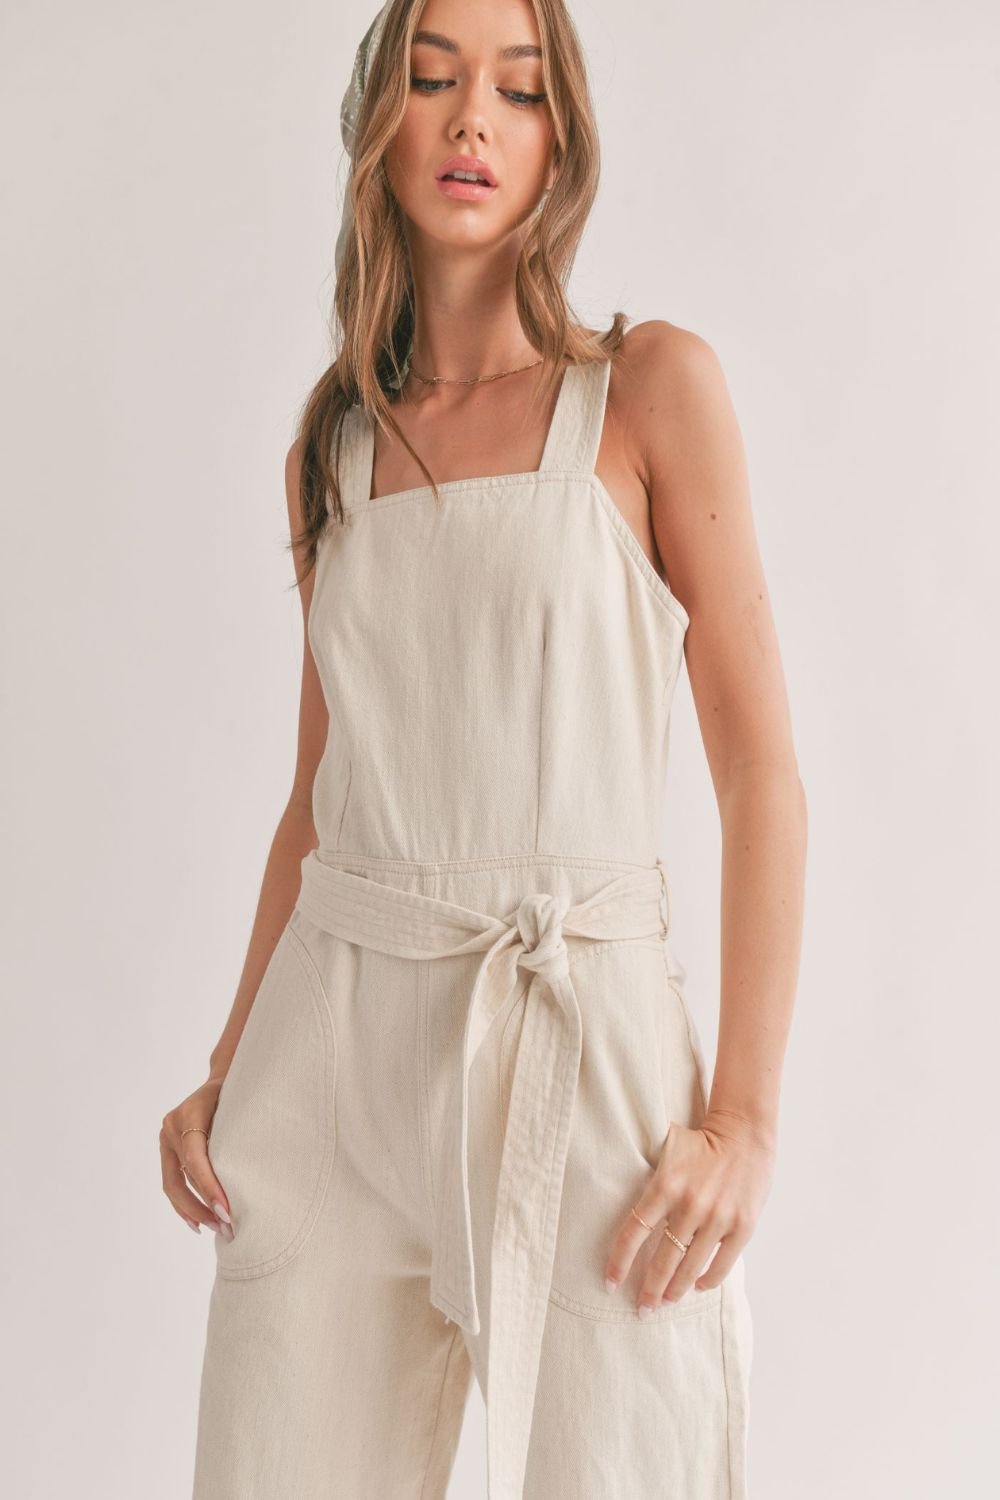 Women's Cotton Denim Overalls | Oatmeal - Women's Jumpsuit - Blooming Daily